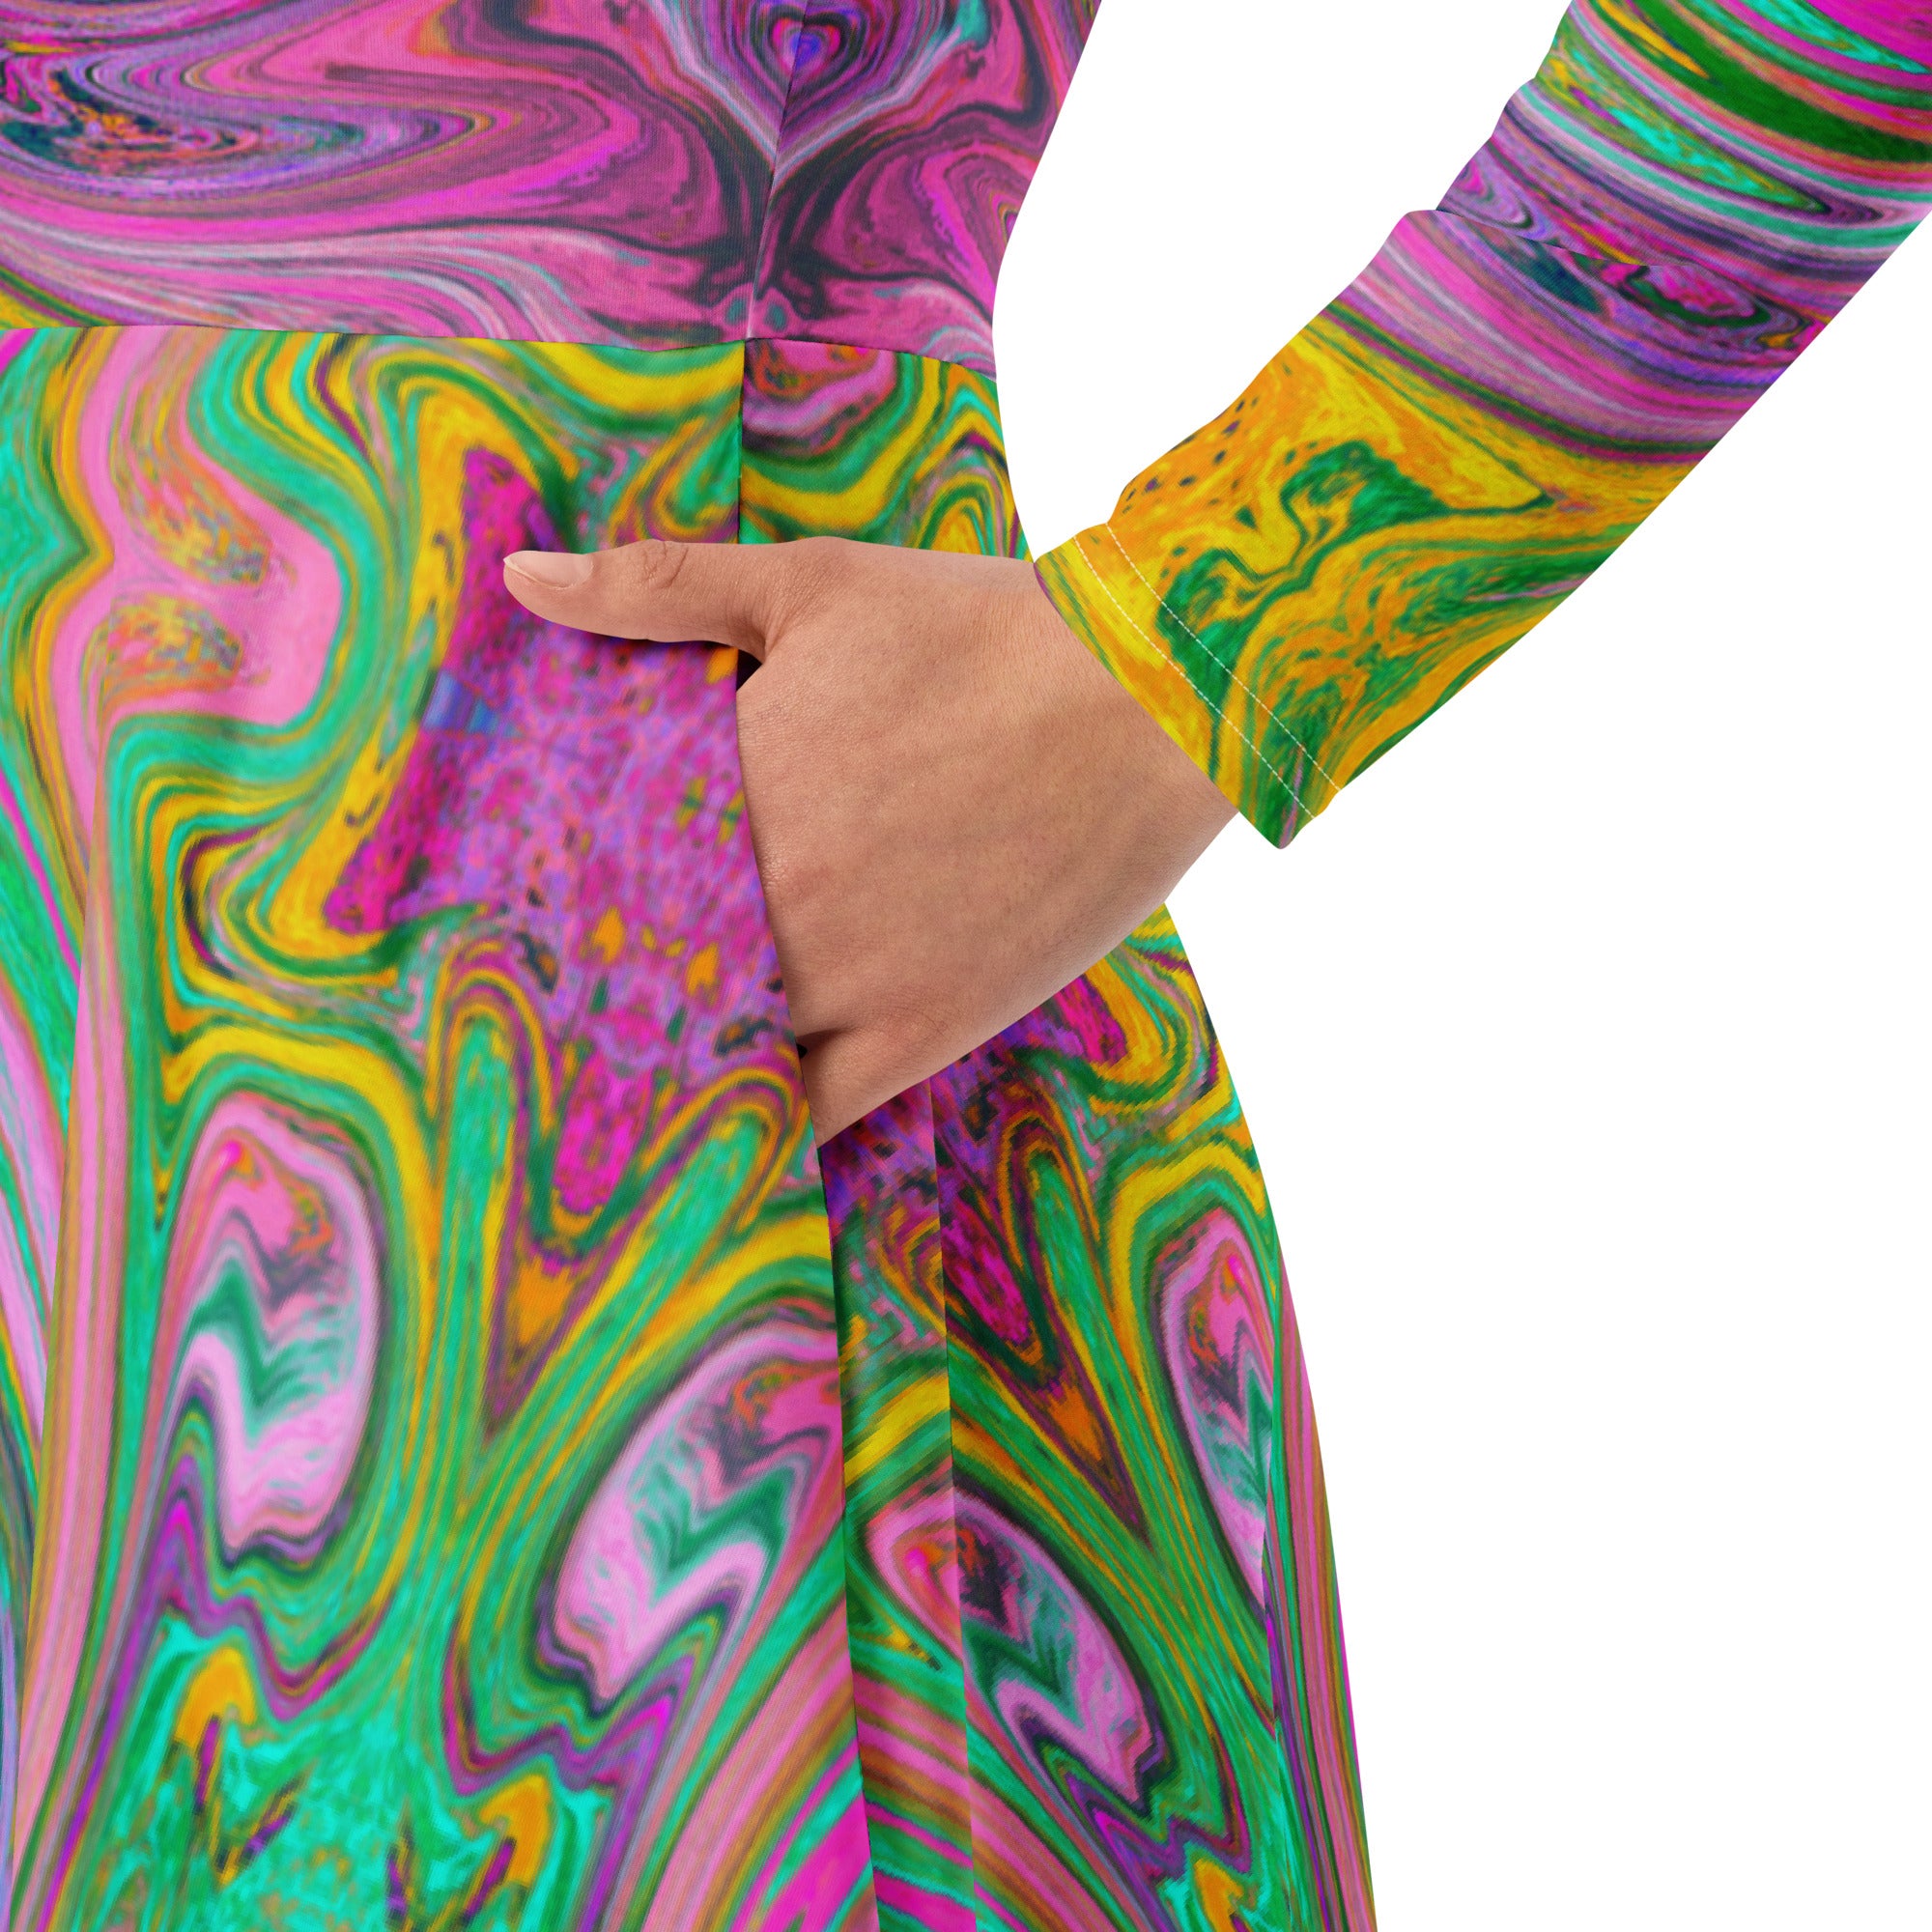 Midi Dress - Groovy Abstract Retro Pink and Mint Green Swirl